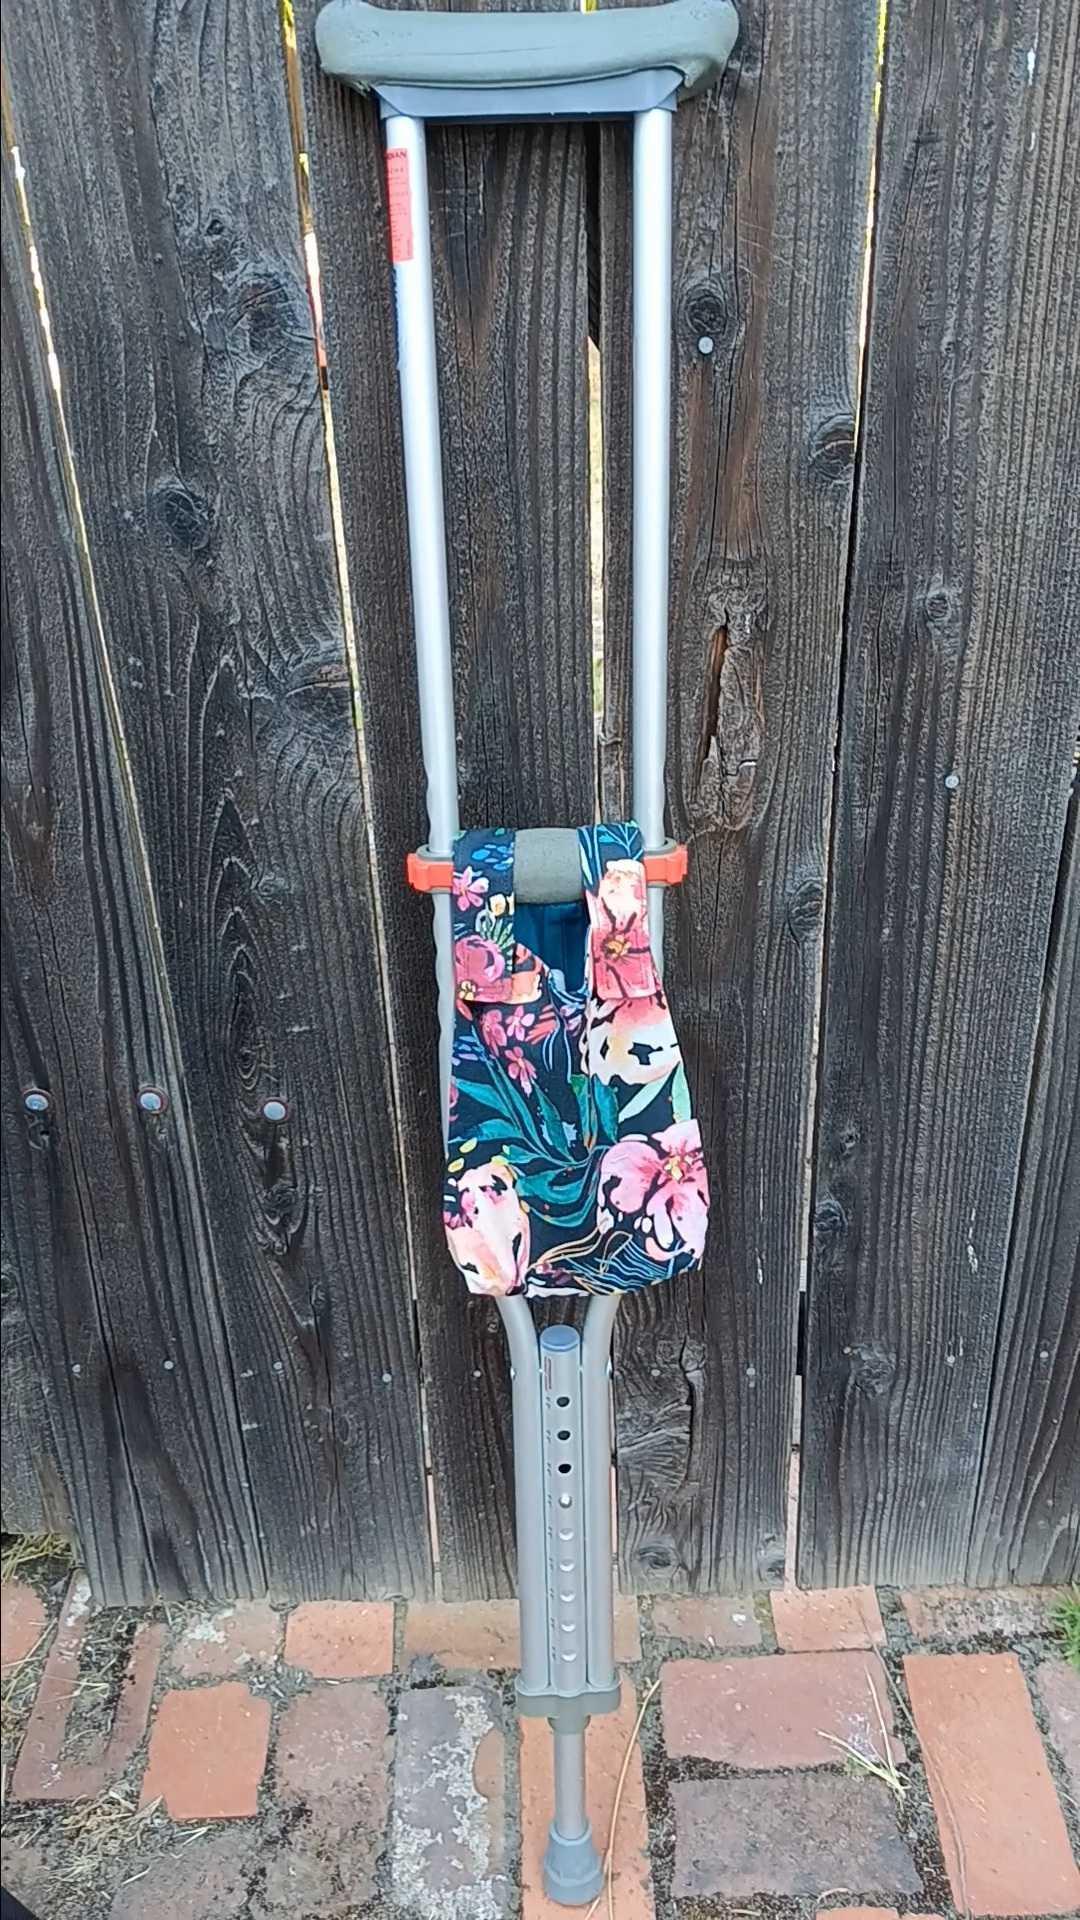 Simple small basic bag for crutch, walker, stroller, scooter handlebars, caddy, wood print fabric hanging bag